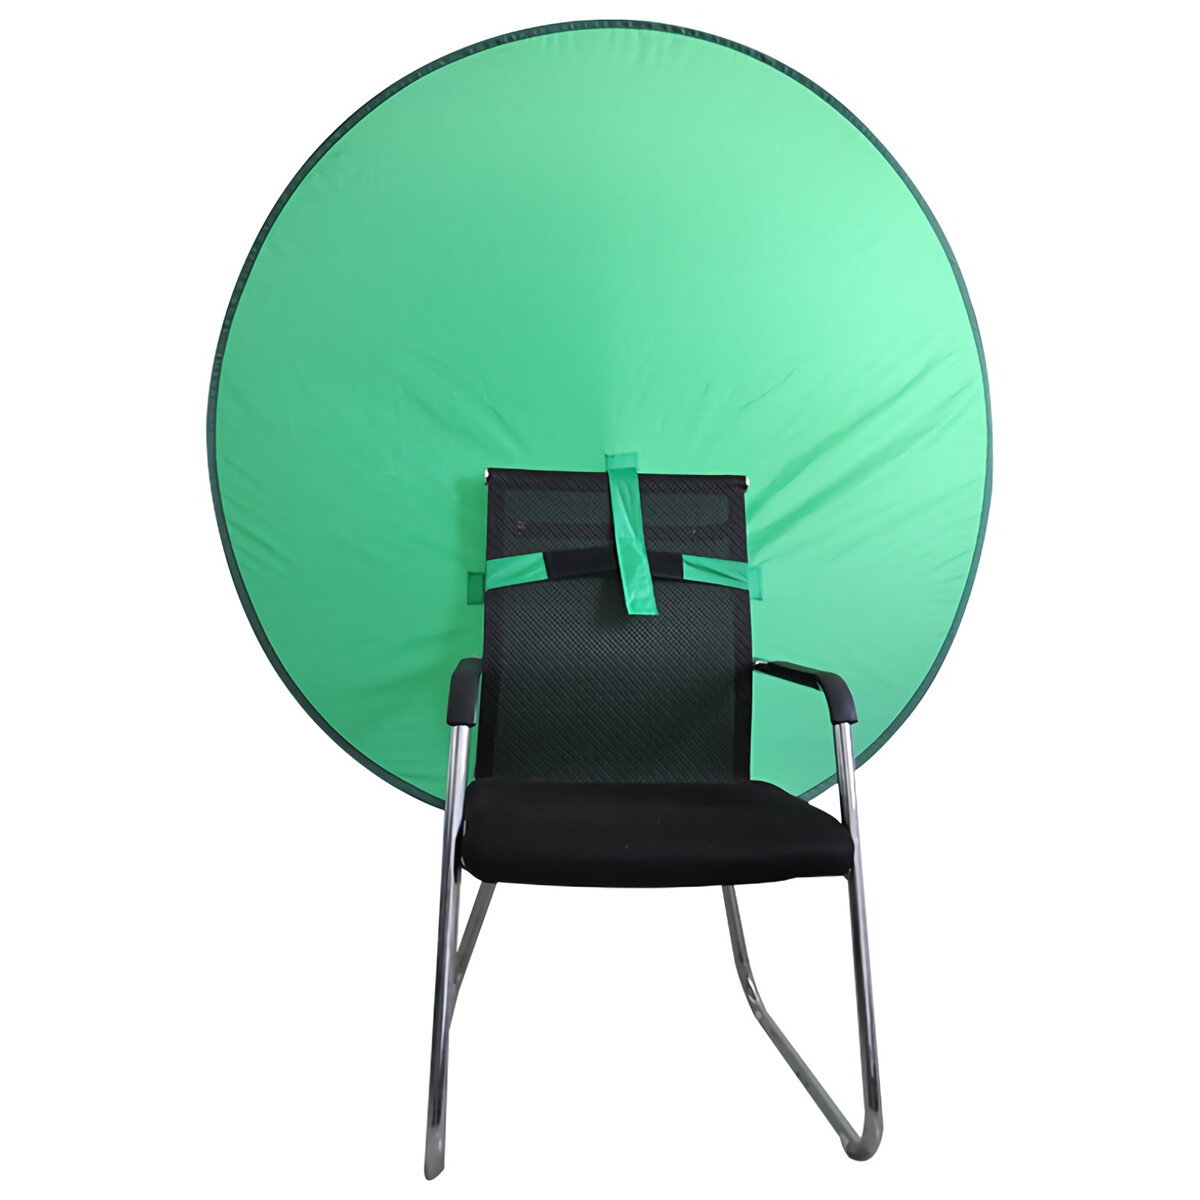 Green Screen Background Portable Foldable Green Photography Backdrops Photo Background for Photo Vid